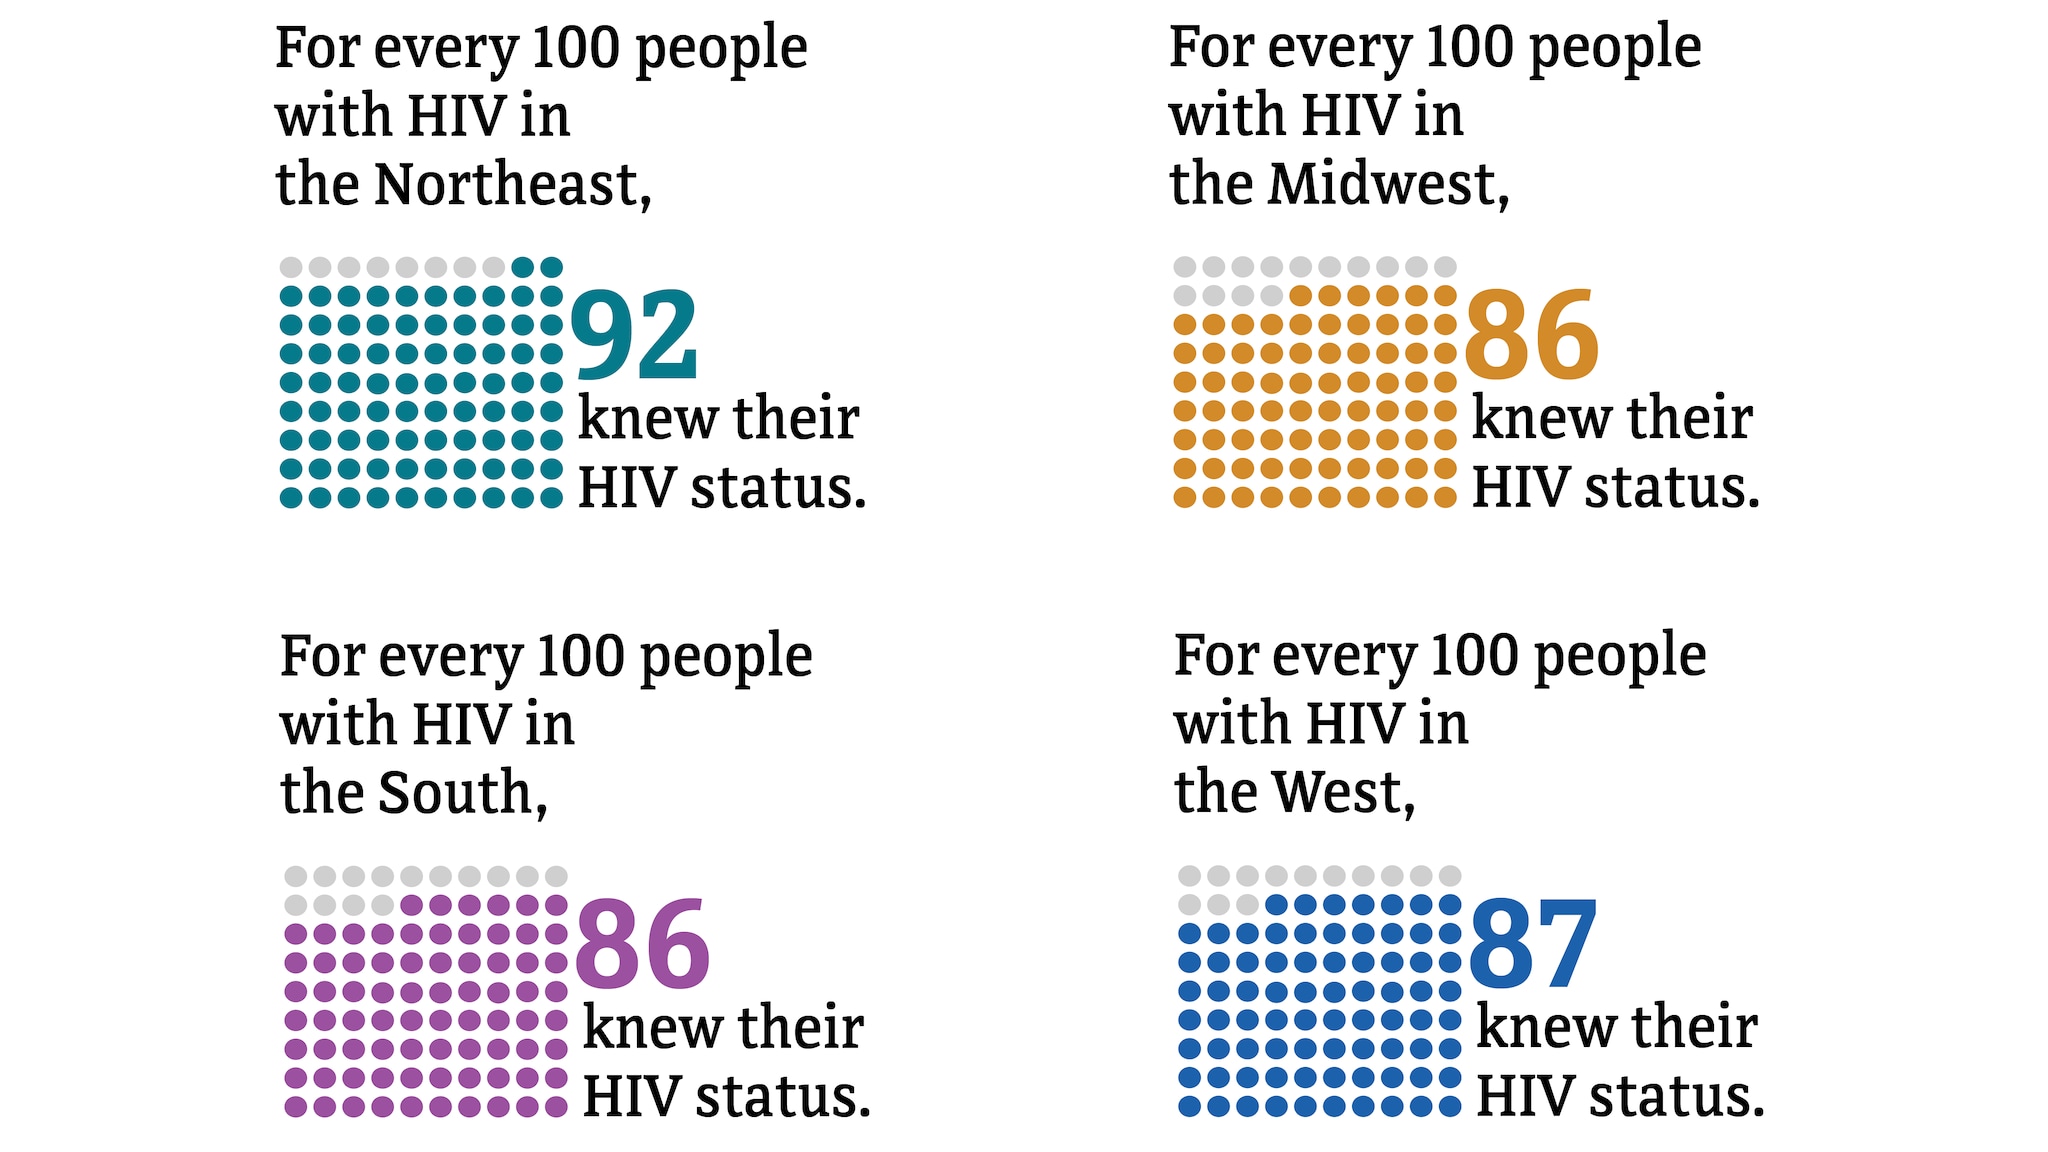 In 2021, for every 100 people with HIV in the Northeast, 92 knew their HIV status. For every 100 people with HIV in the South, 86 knew their HIV status. For every 100 people with HIV in the Midwest, 86 knew their HIV status. For every 100 people with HIV in the West, 87 knew their HIV status.